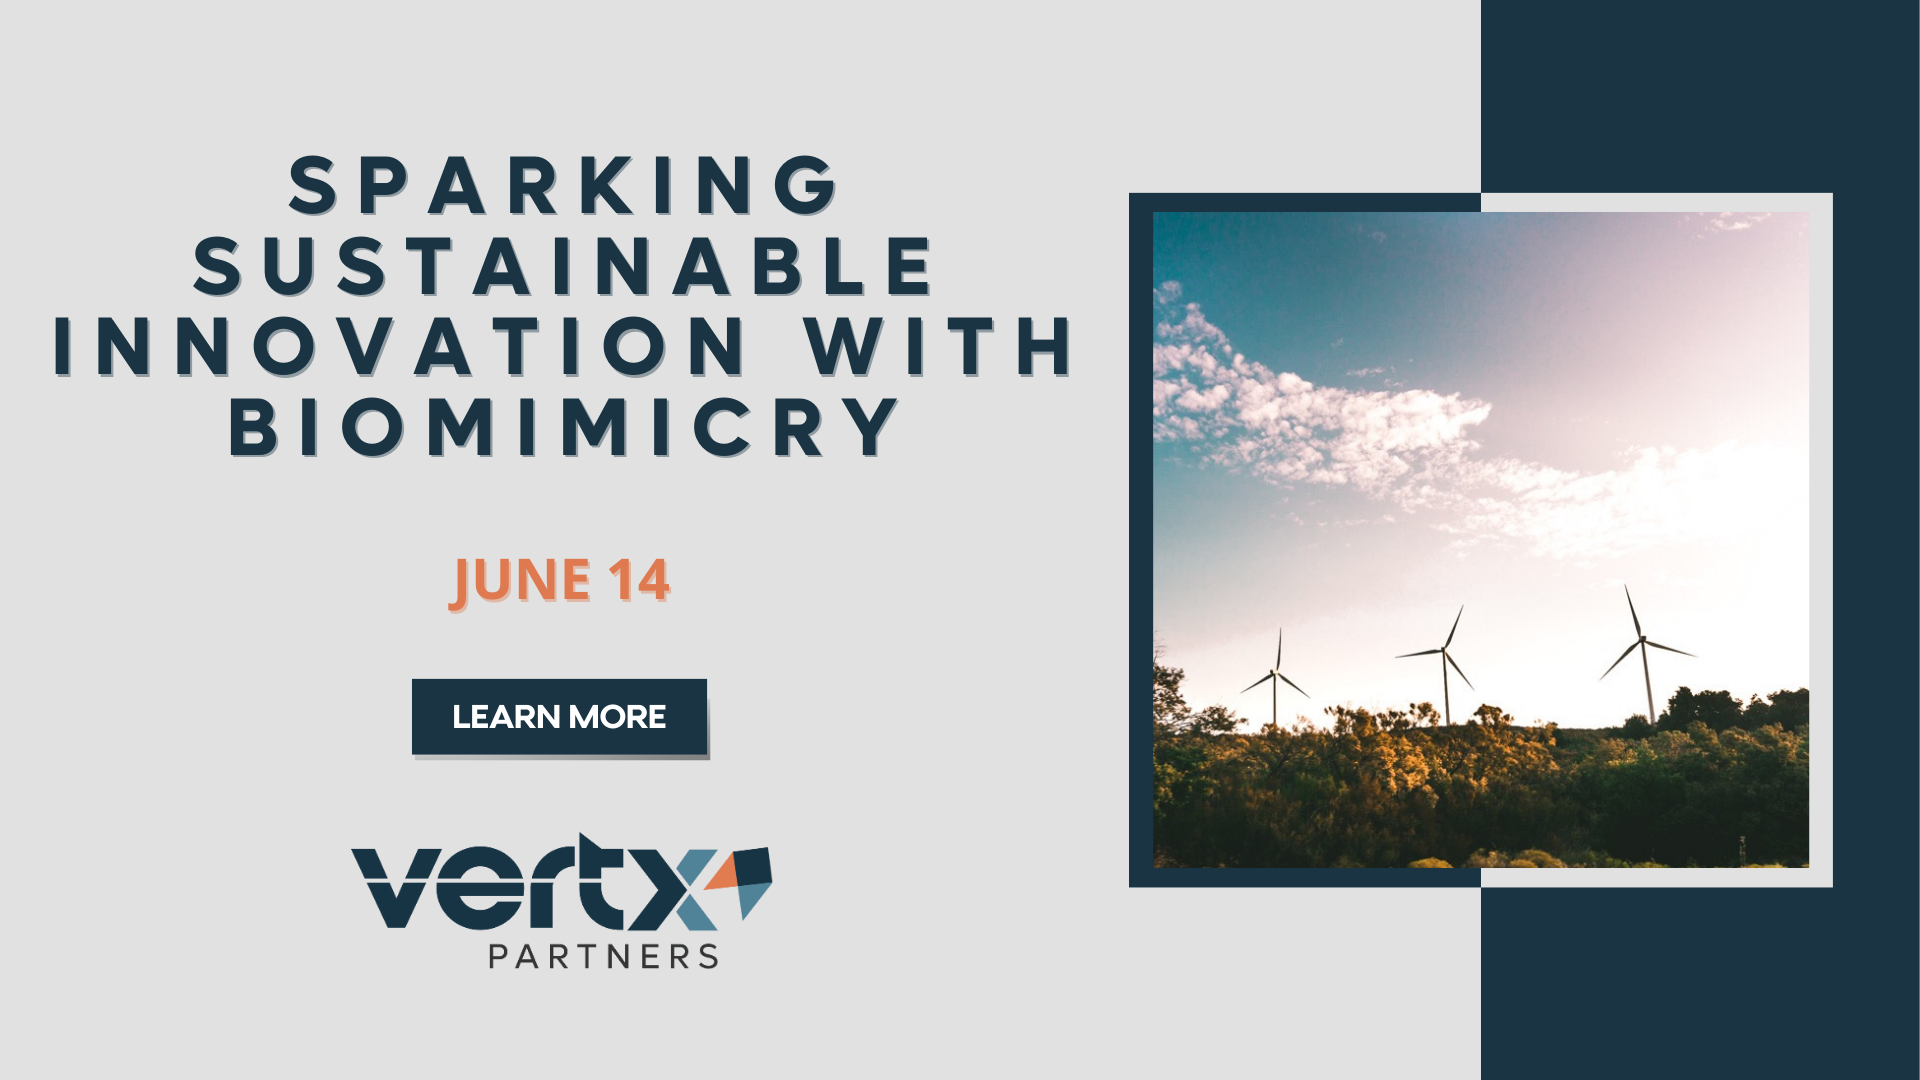 This graphic has the title "Sparking Sustainable Innovation With Biomimicry" with the date June 14 under it and a photo of windmills with a blue sky in the background next to it